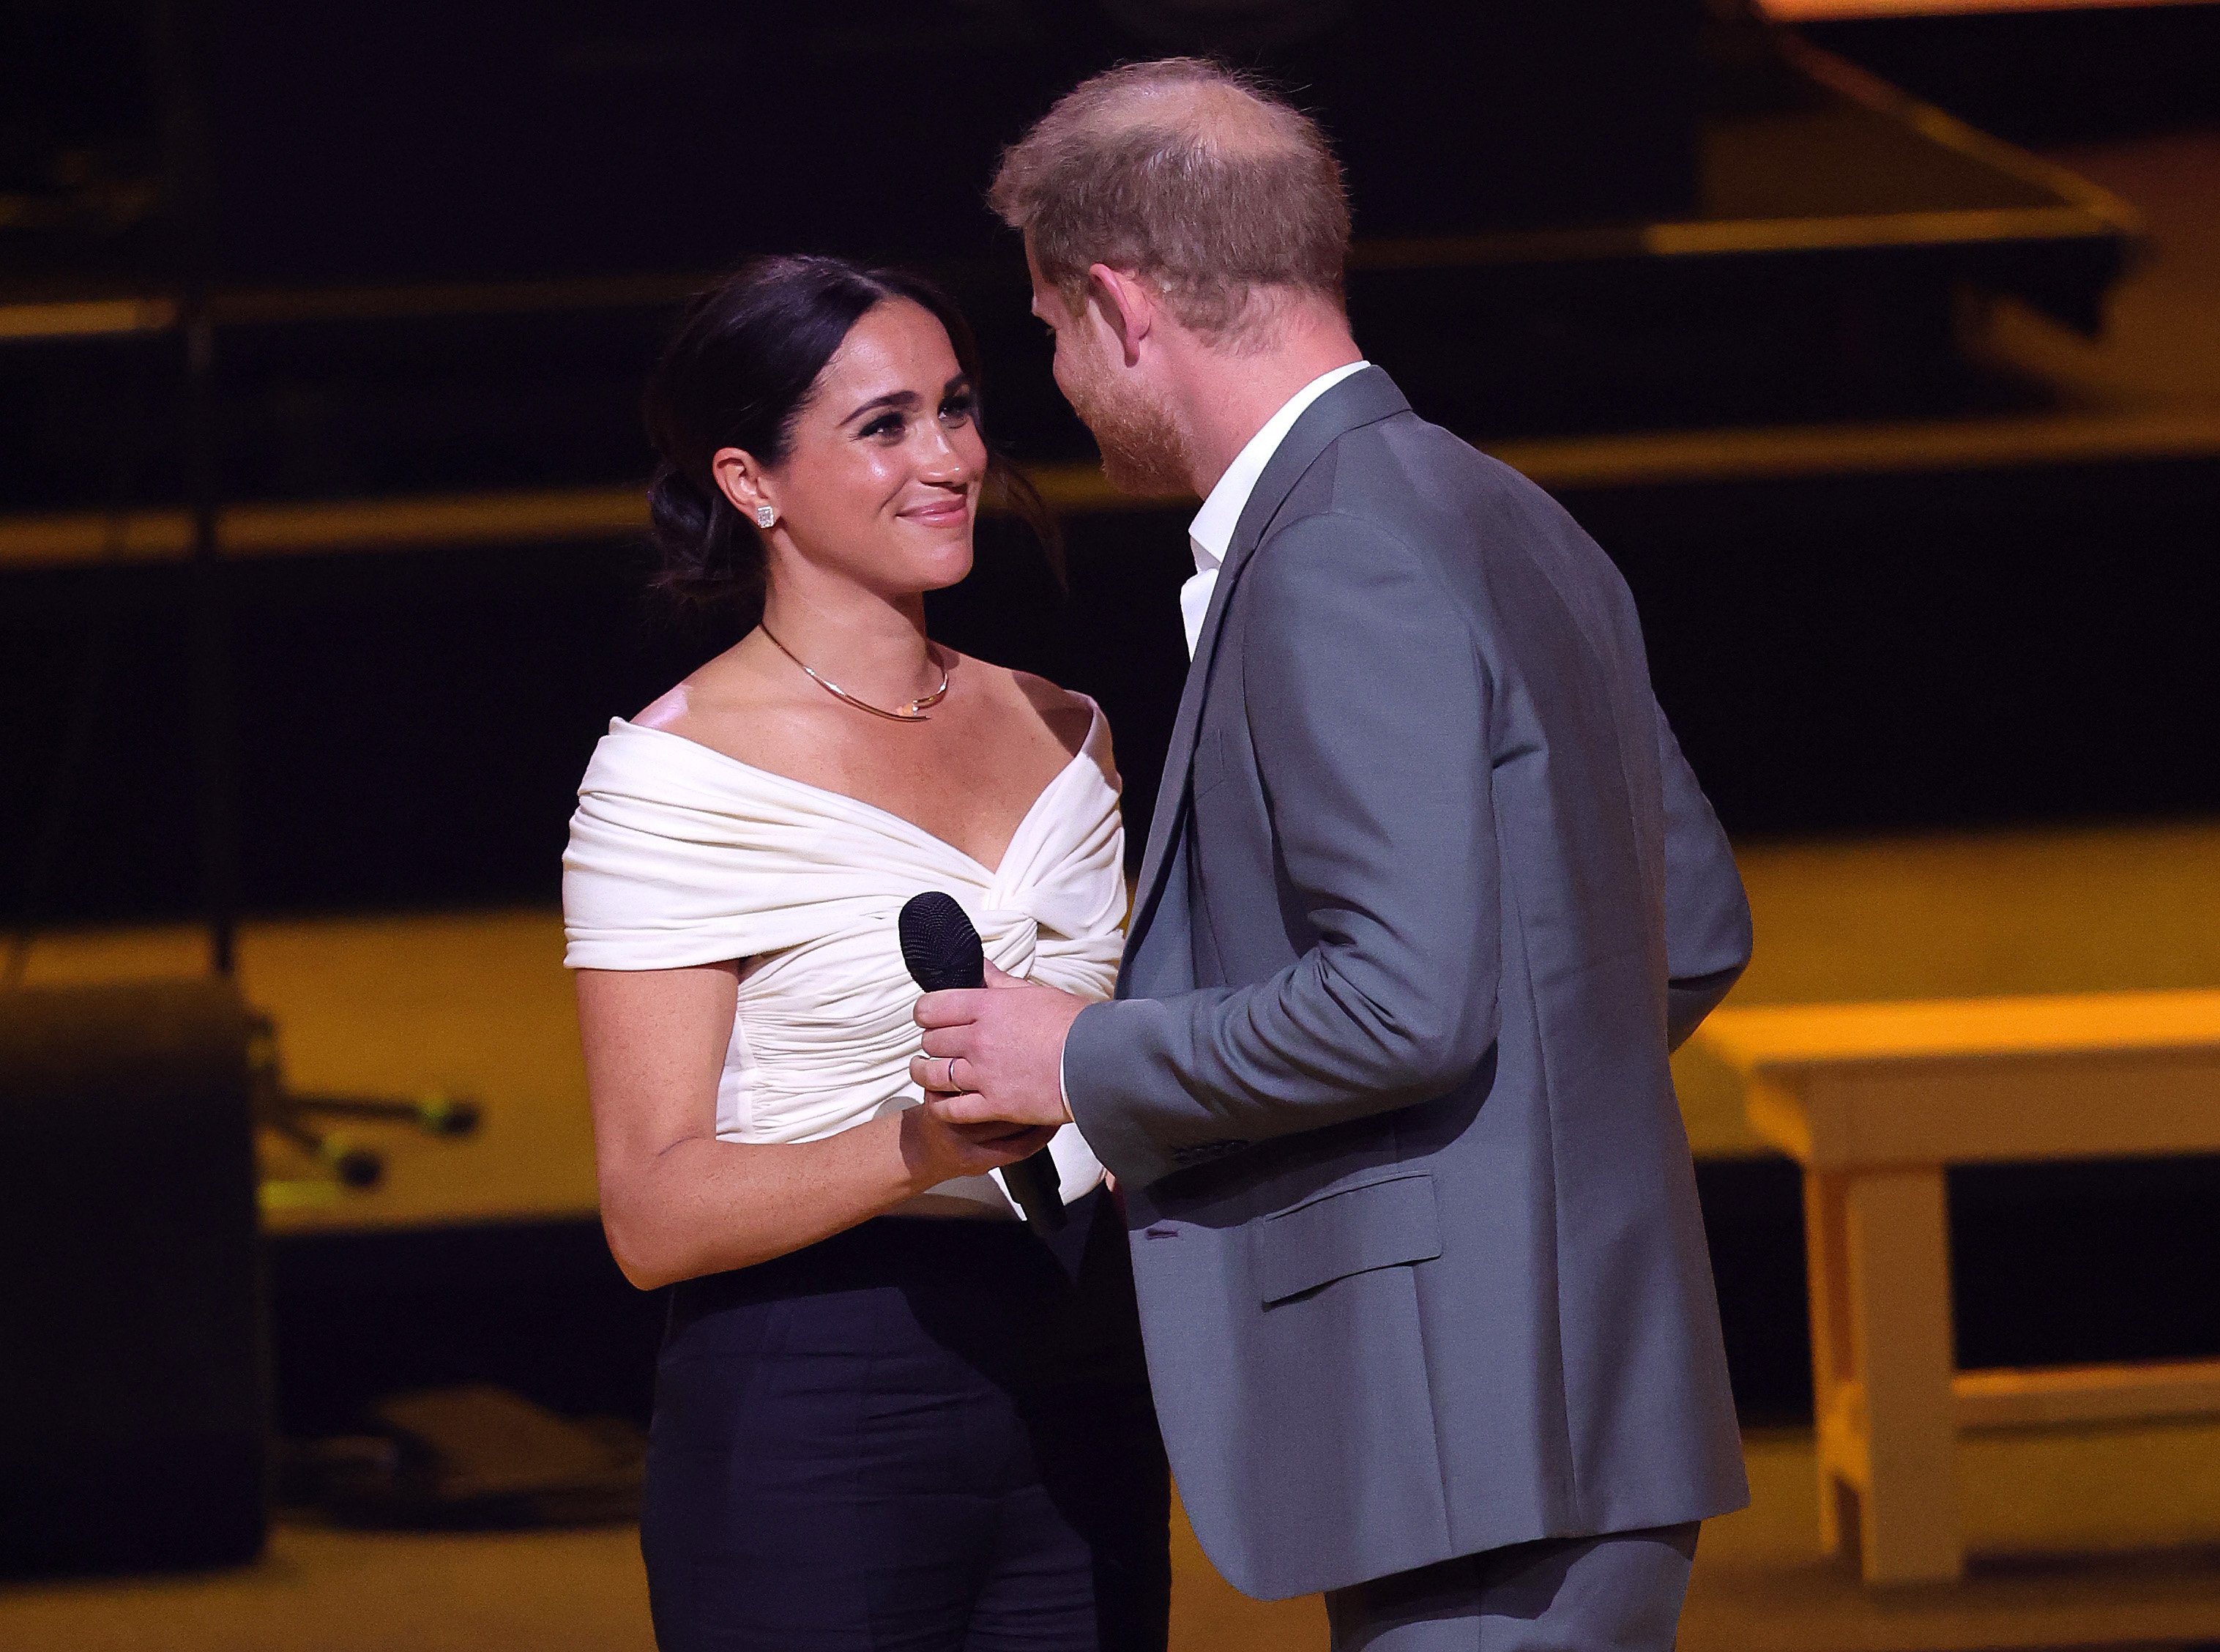 Prince Harry, Duke of Sussex and Meghan, Duchess of Sussex on stage during the Invictus Games The Hague 2020 Opening Ceremony at Zuiderpark on April 16, 2022 in The Hague, Netherlands. | Source: Getty Images